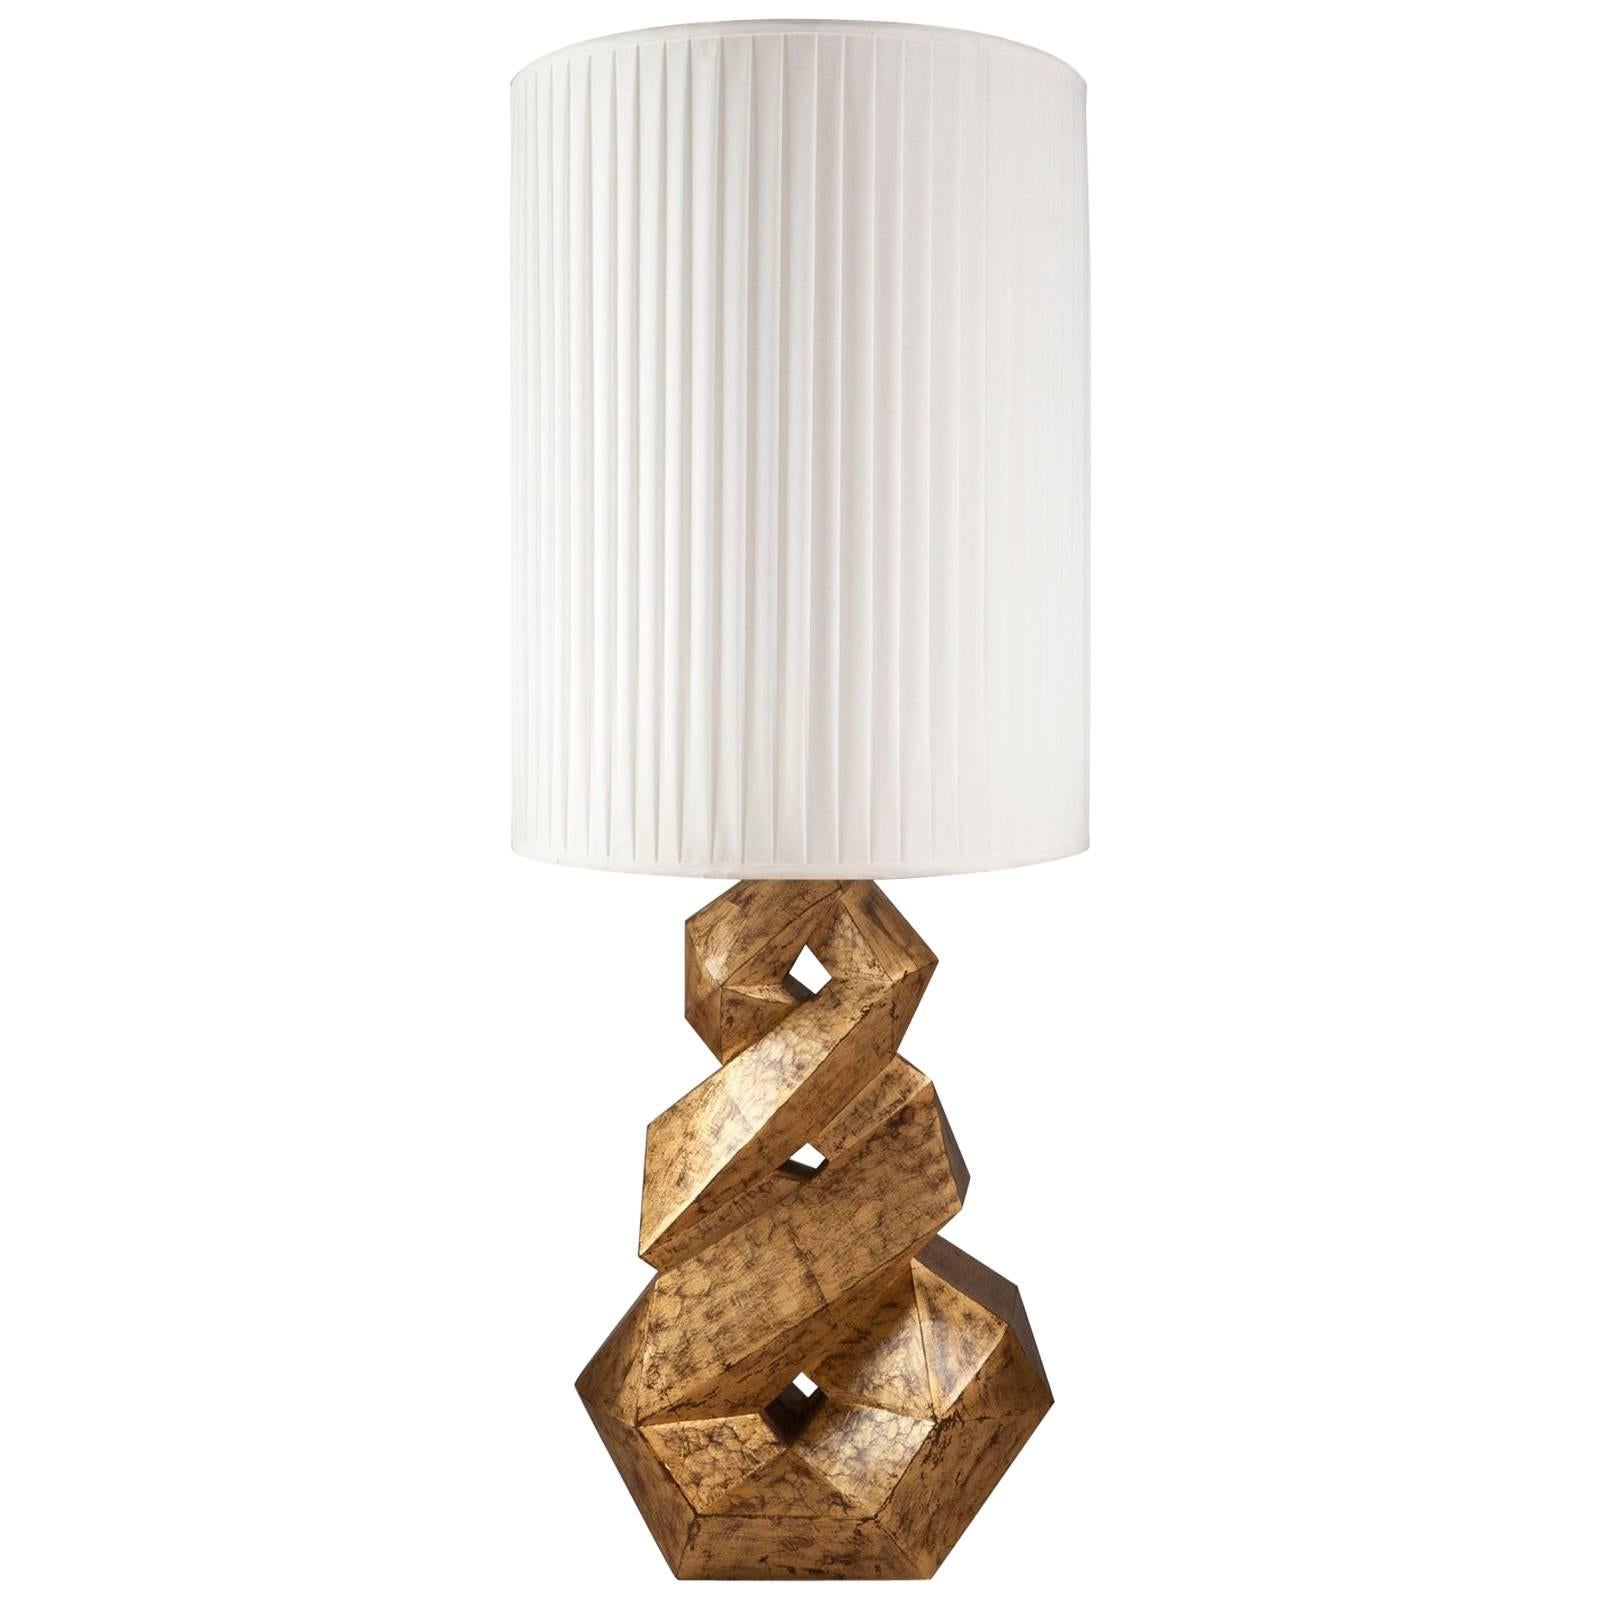 Artemus Table Lamp with Hand-Carved Solid Wood Base